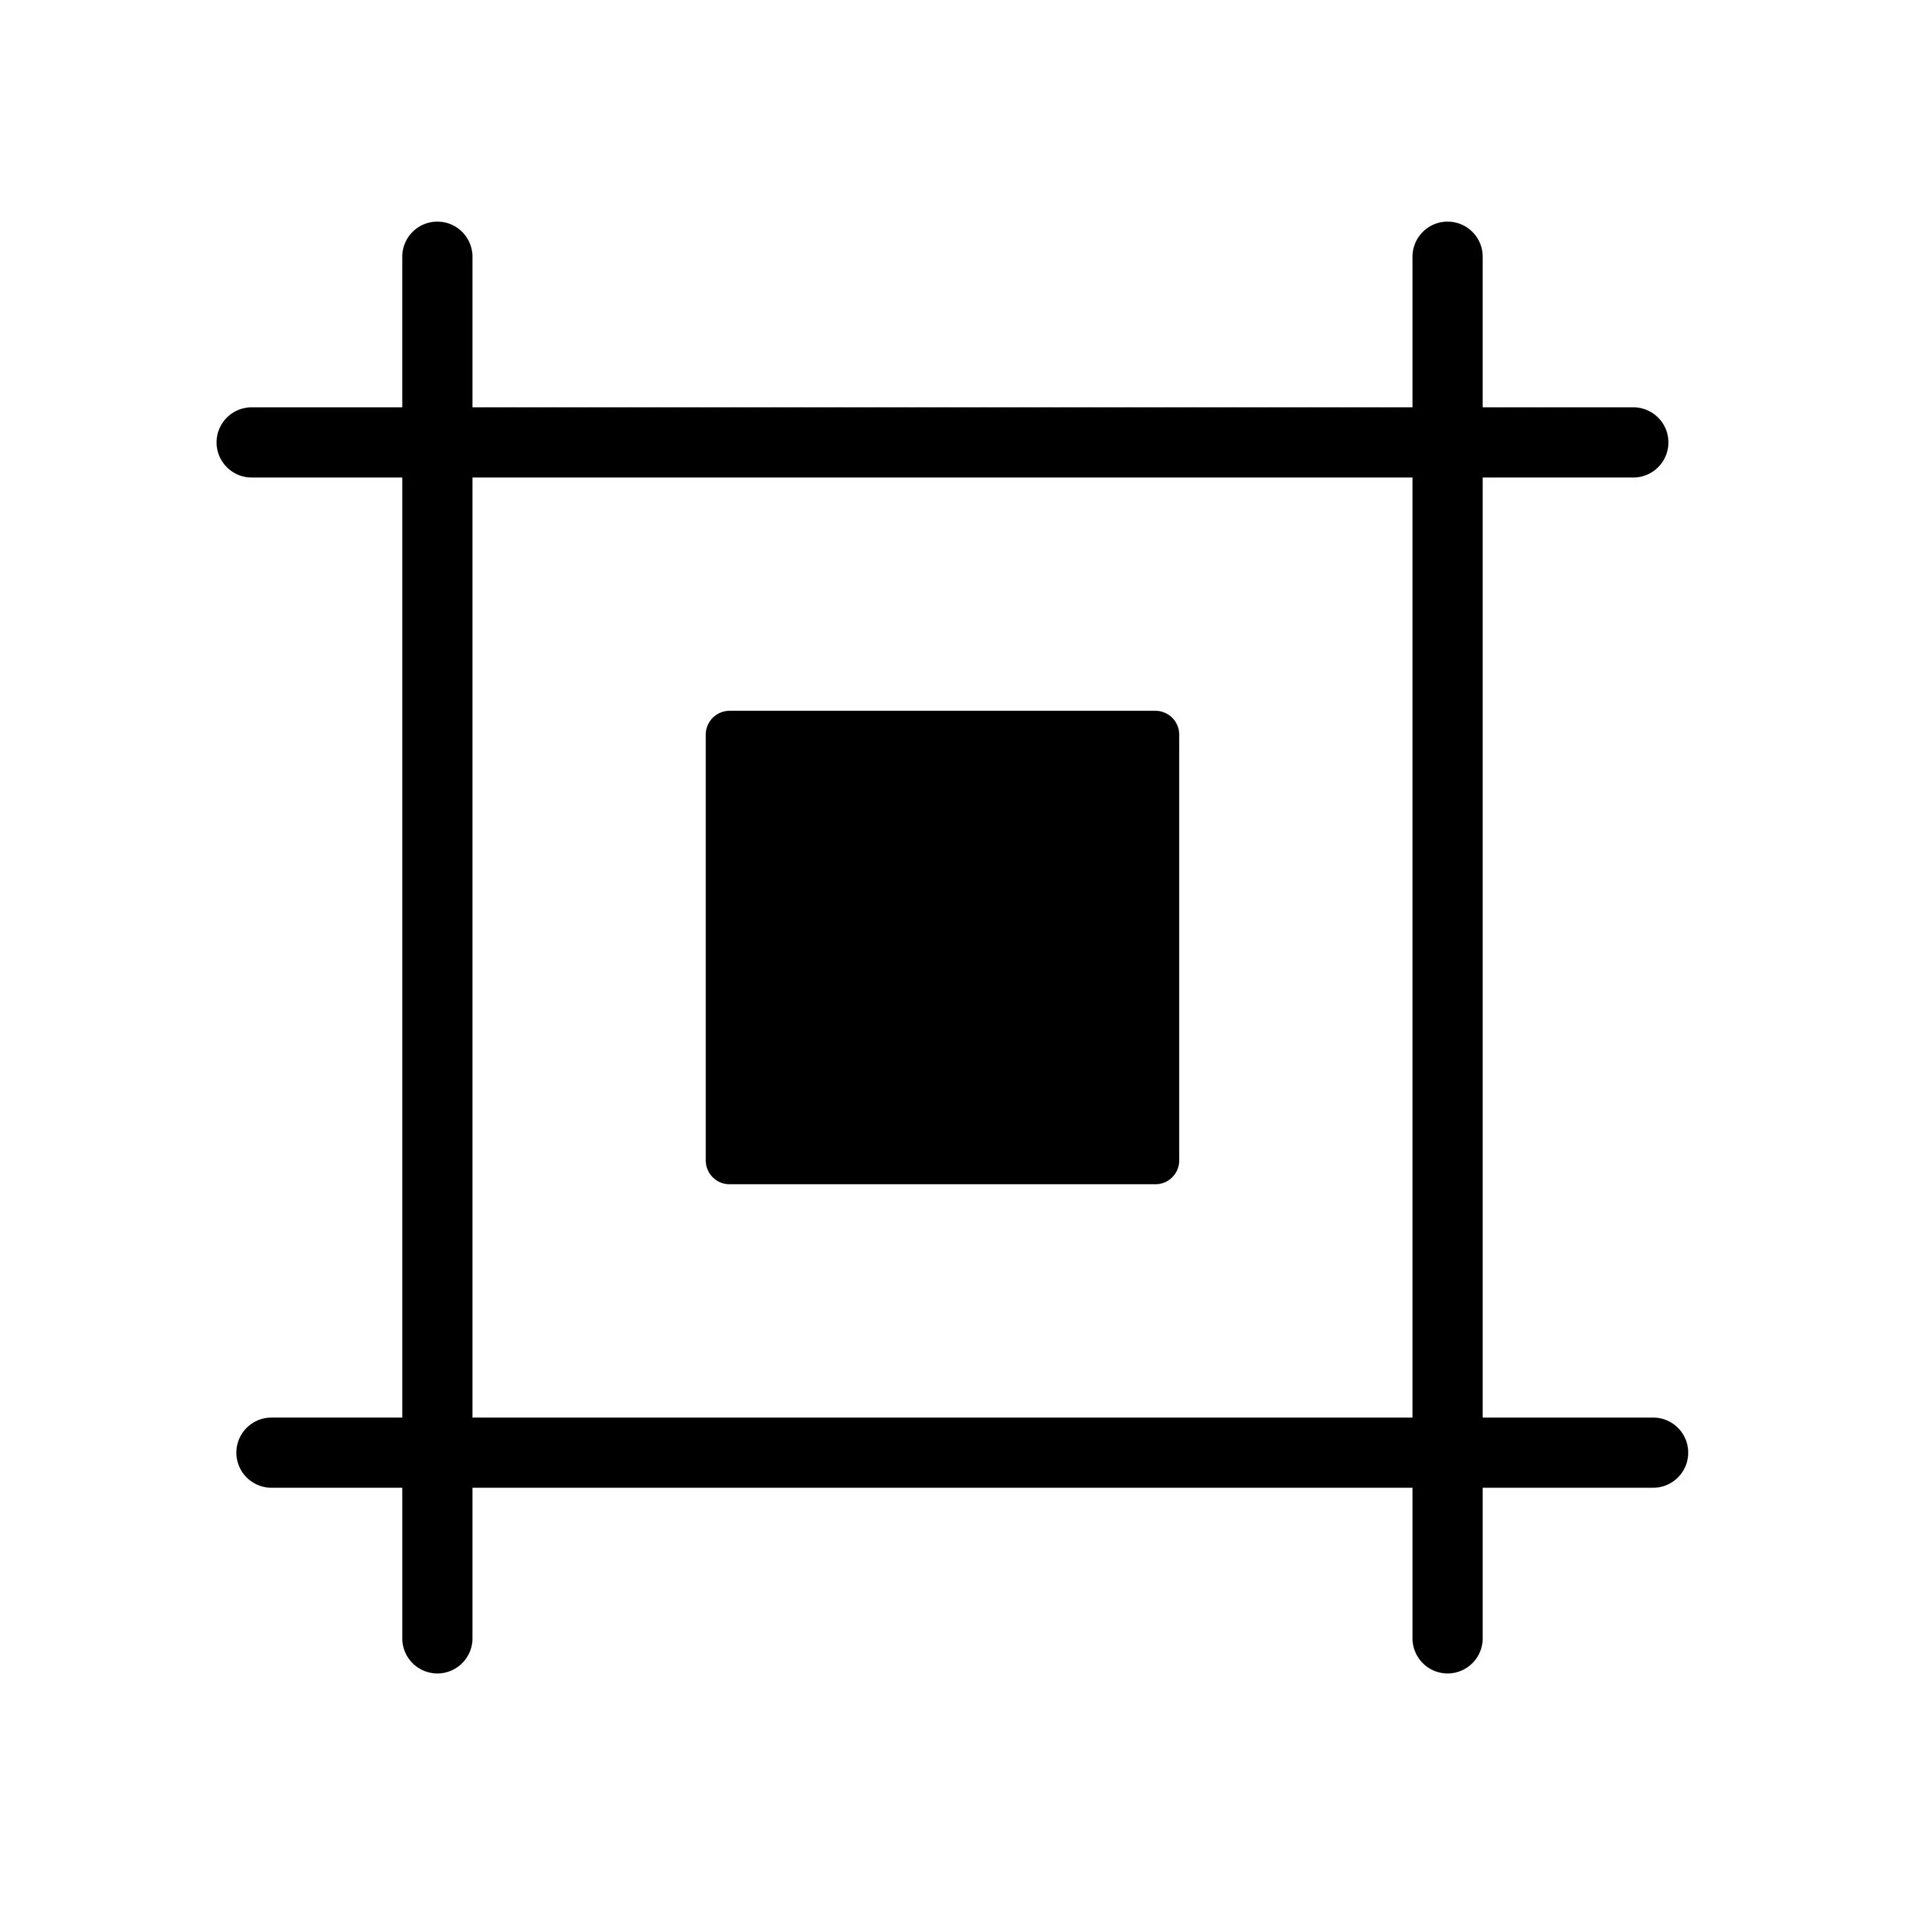 Square icons. Square icon. Dashed Square icon. Layout icon. Square icon PNG.